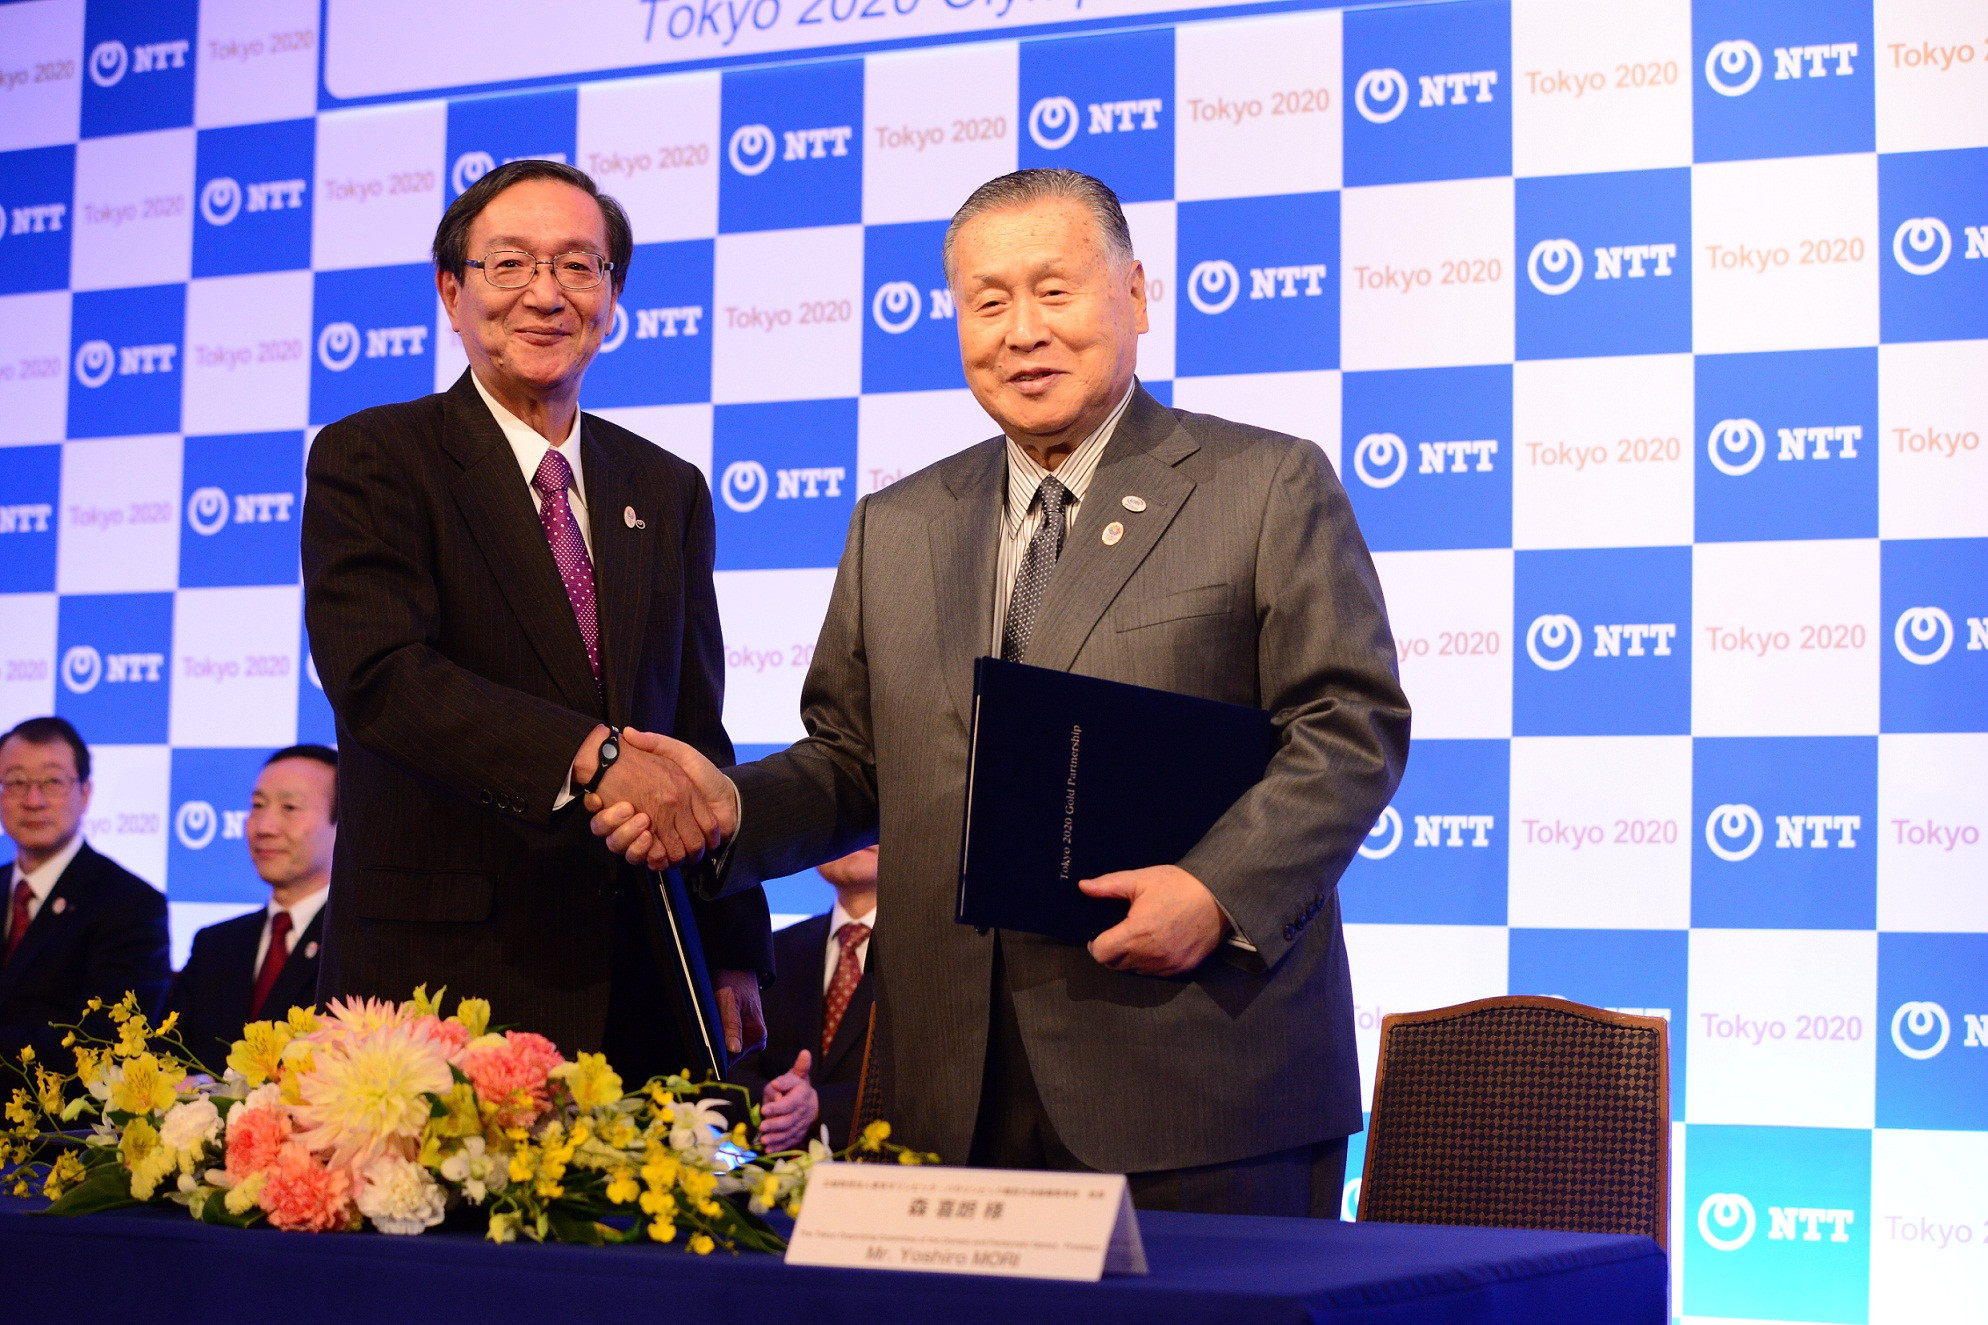 The NTT Group became the first Gold Partners of Tokyo 2020 when they signed up as the official telecommunications services partners in 2015 ©Tokyo 2020